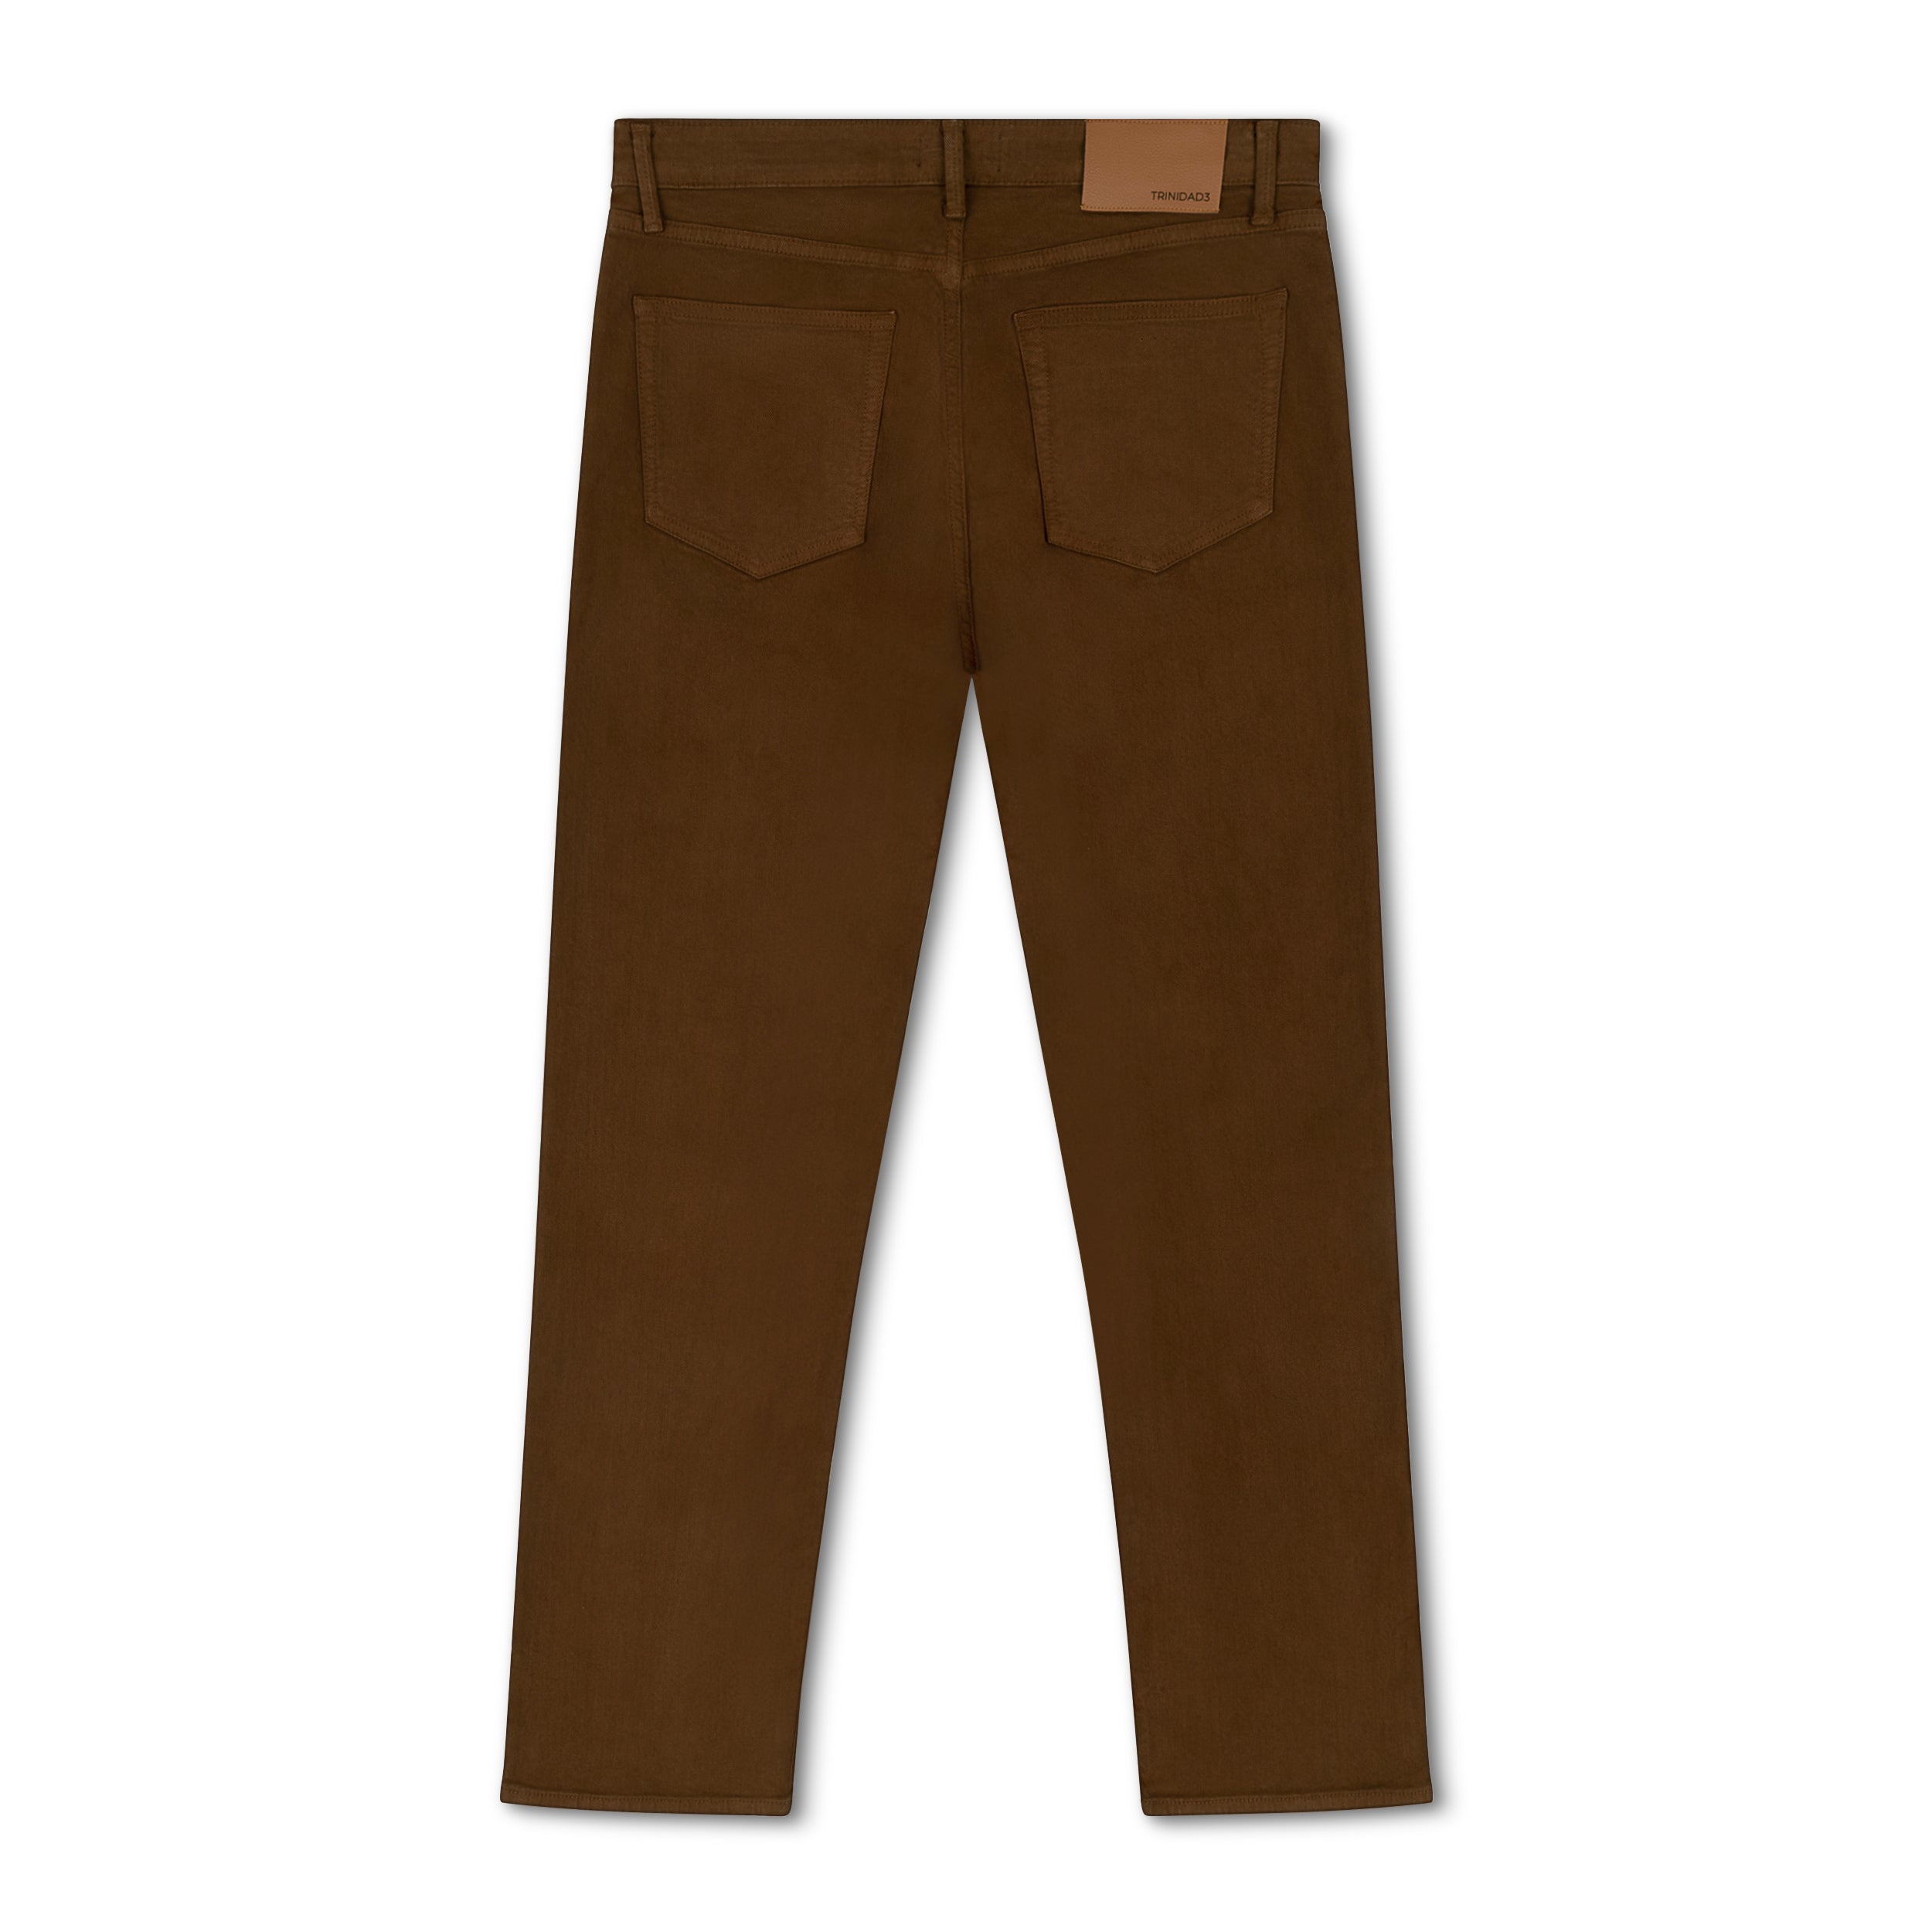 RELAXED ATHLETIC STRAIGHT, Bark Brown